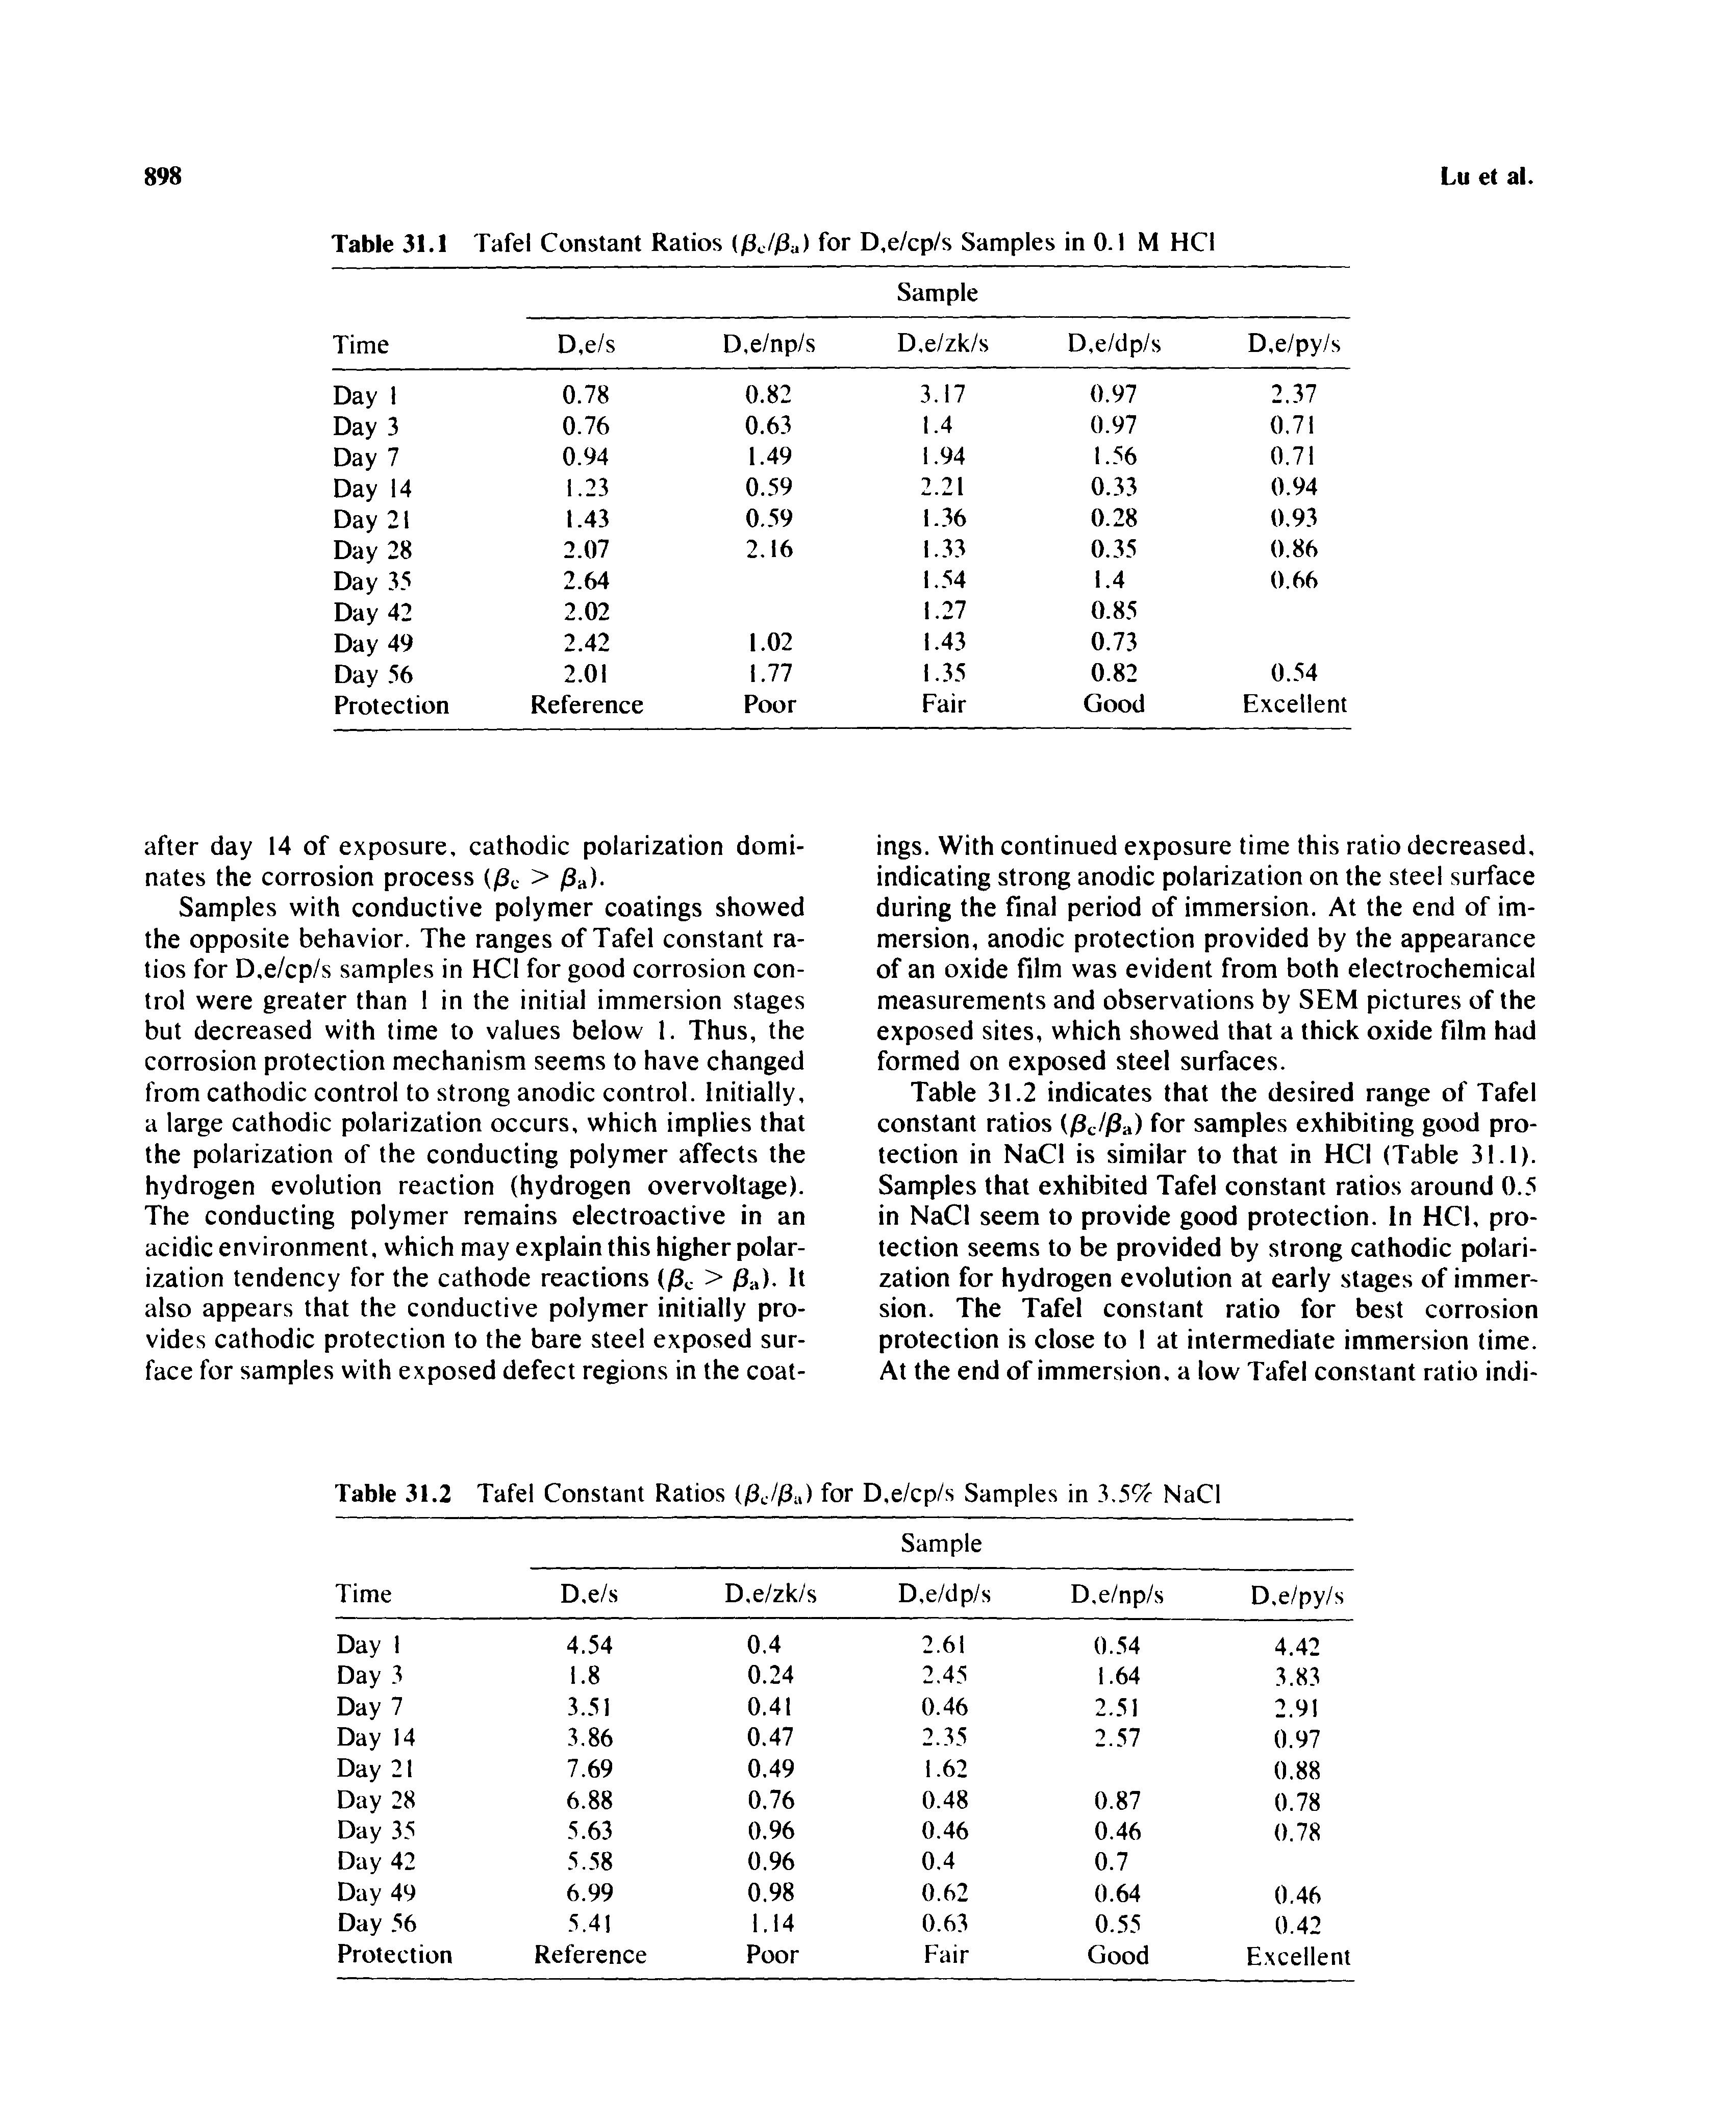 Table 31.2 indicates that the desired range of Tafel constant ratios (/3c//8a) for samples exhibiting good protection in NaCl is similar to that in HCl (Table 31.1). Samples that exhibited Tafel constant ratios around 0.5 in NaCI seem to provide good protection. In HCl, protection seems to be provided by strong cathodic polarization for hydrogen evolution at early stages of immersion. The Tafel constant ratio for best corrosion protection is close to I at intermediate immersion time. At the end of immersion, a low Tafel constant ratio indi-...